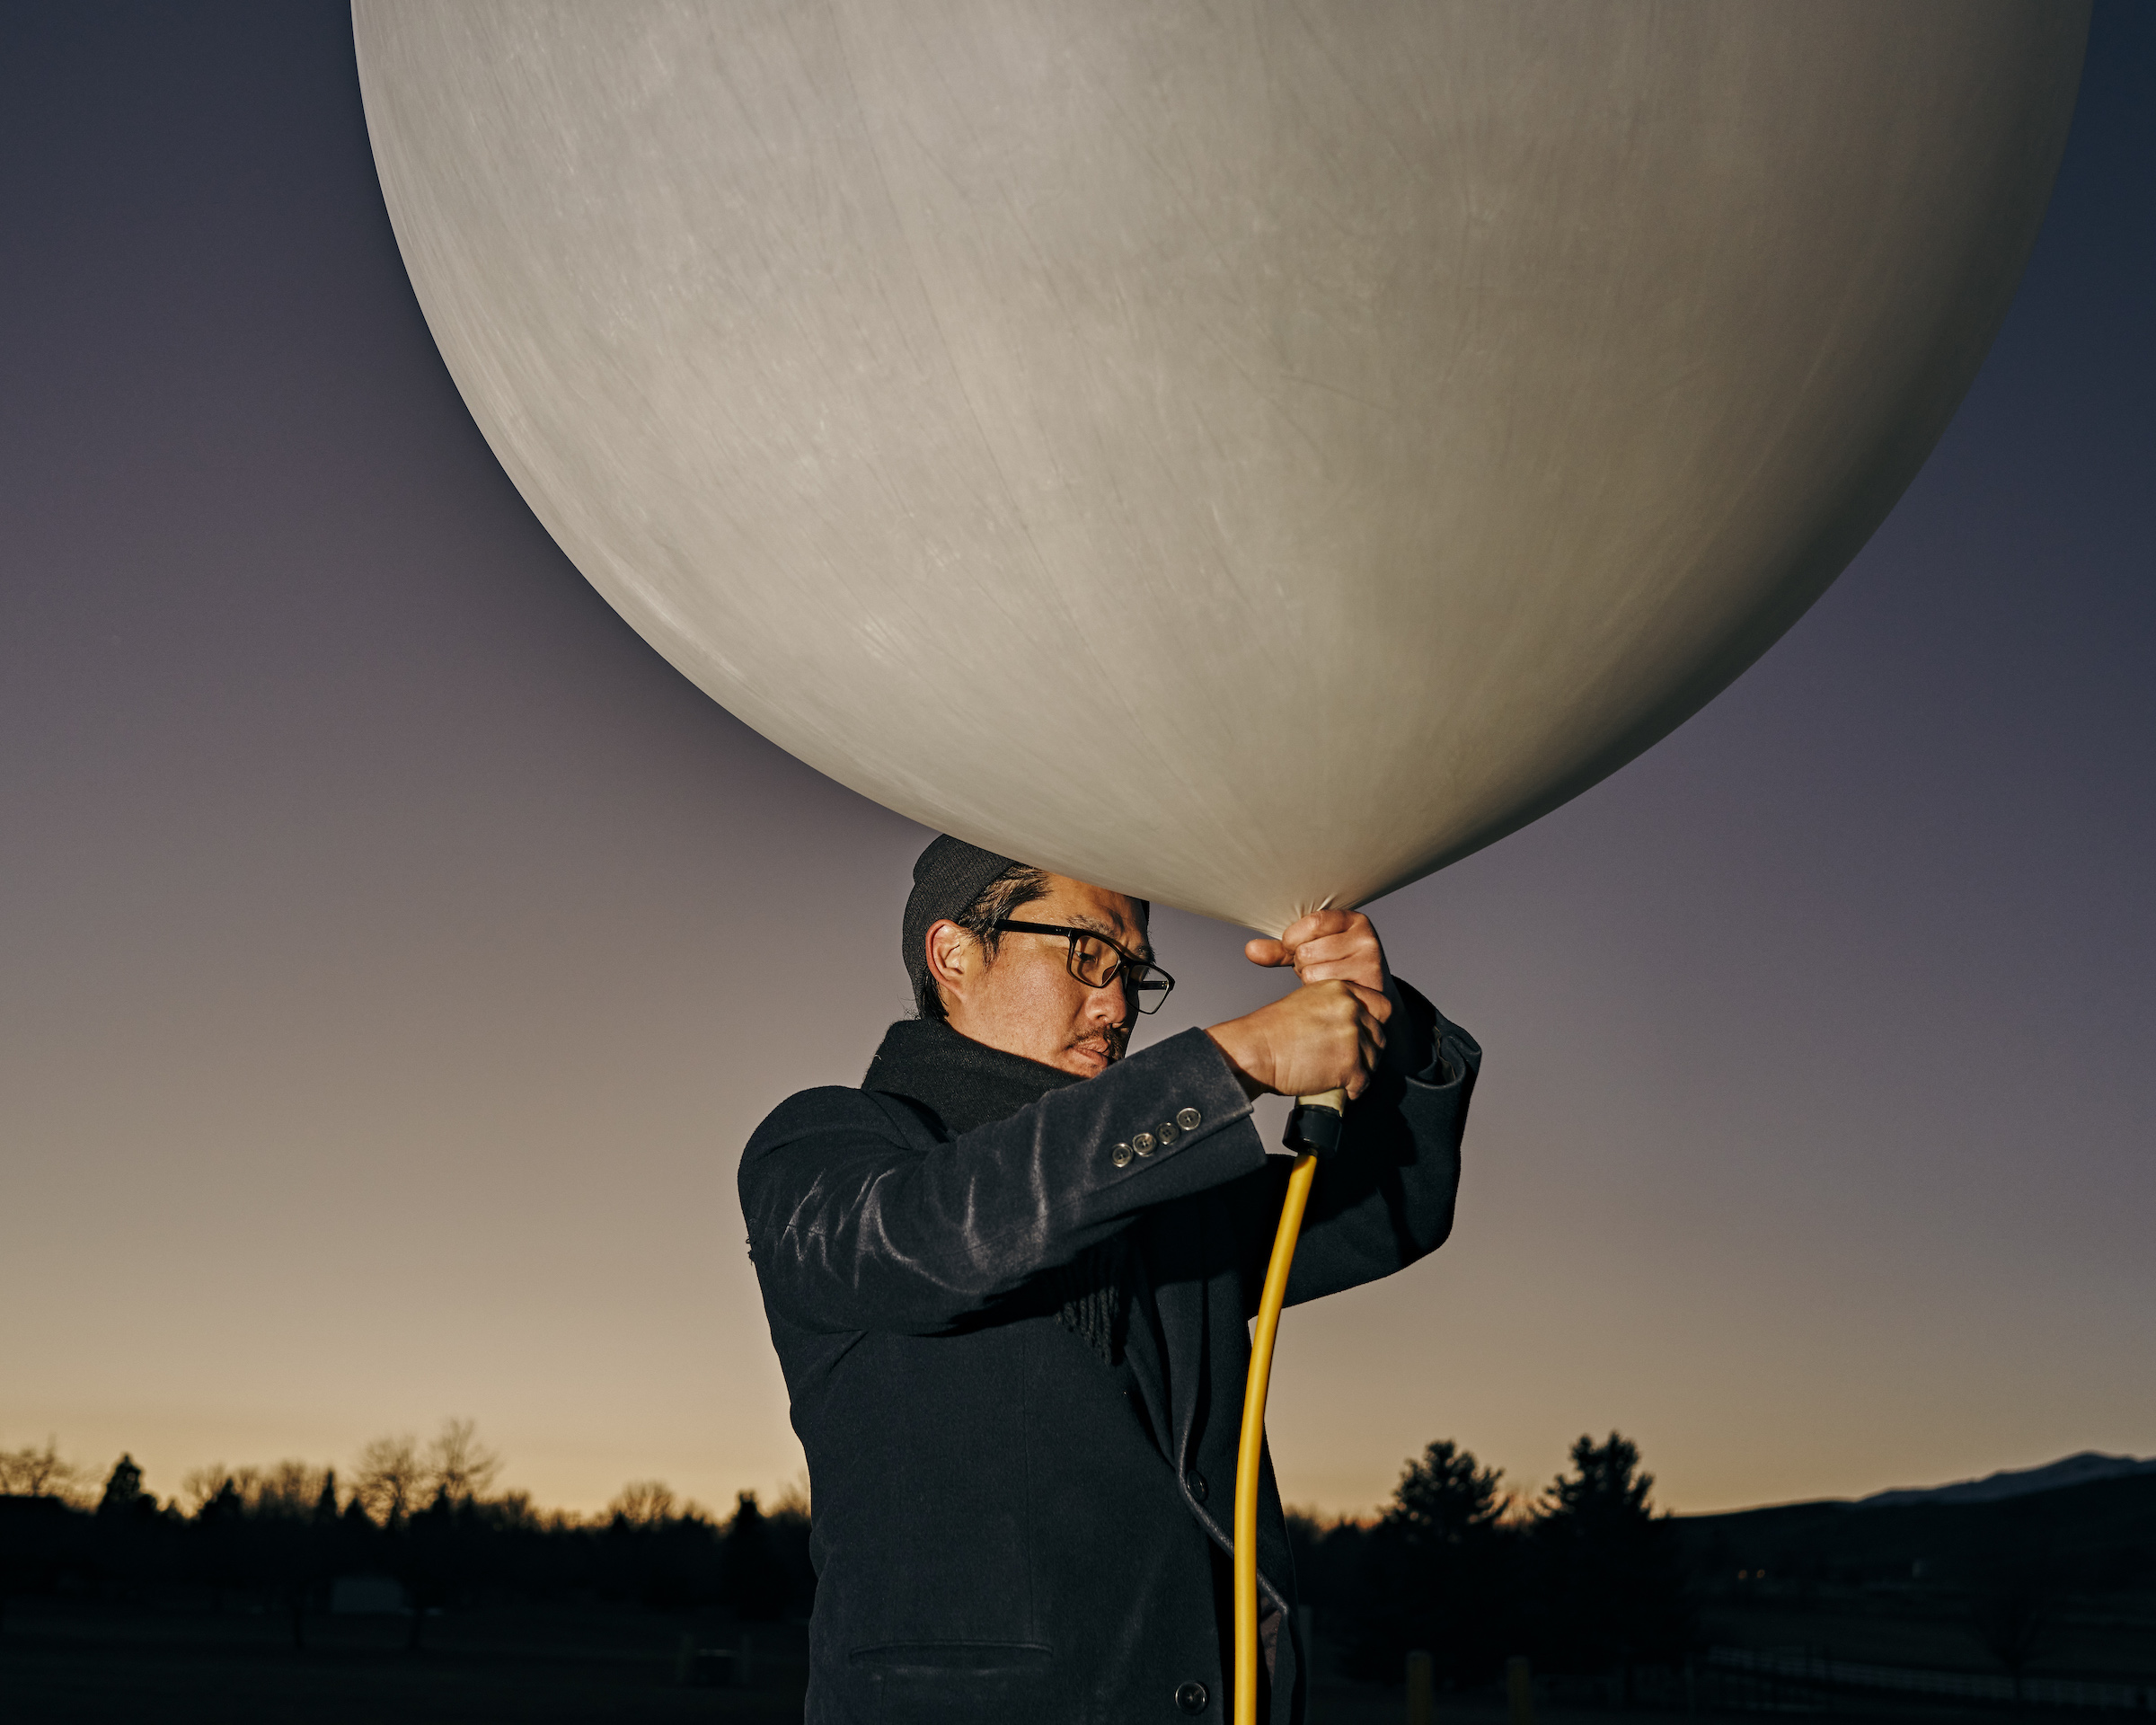 Co-founder Andrew Song of solar geoengineering startup Make Sunsets holds a weather balloon filled with helium, air and sulfur dioxide at a park in Reno, Nevada, United States on February 12, 2023.